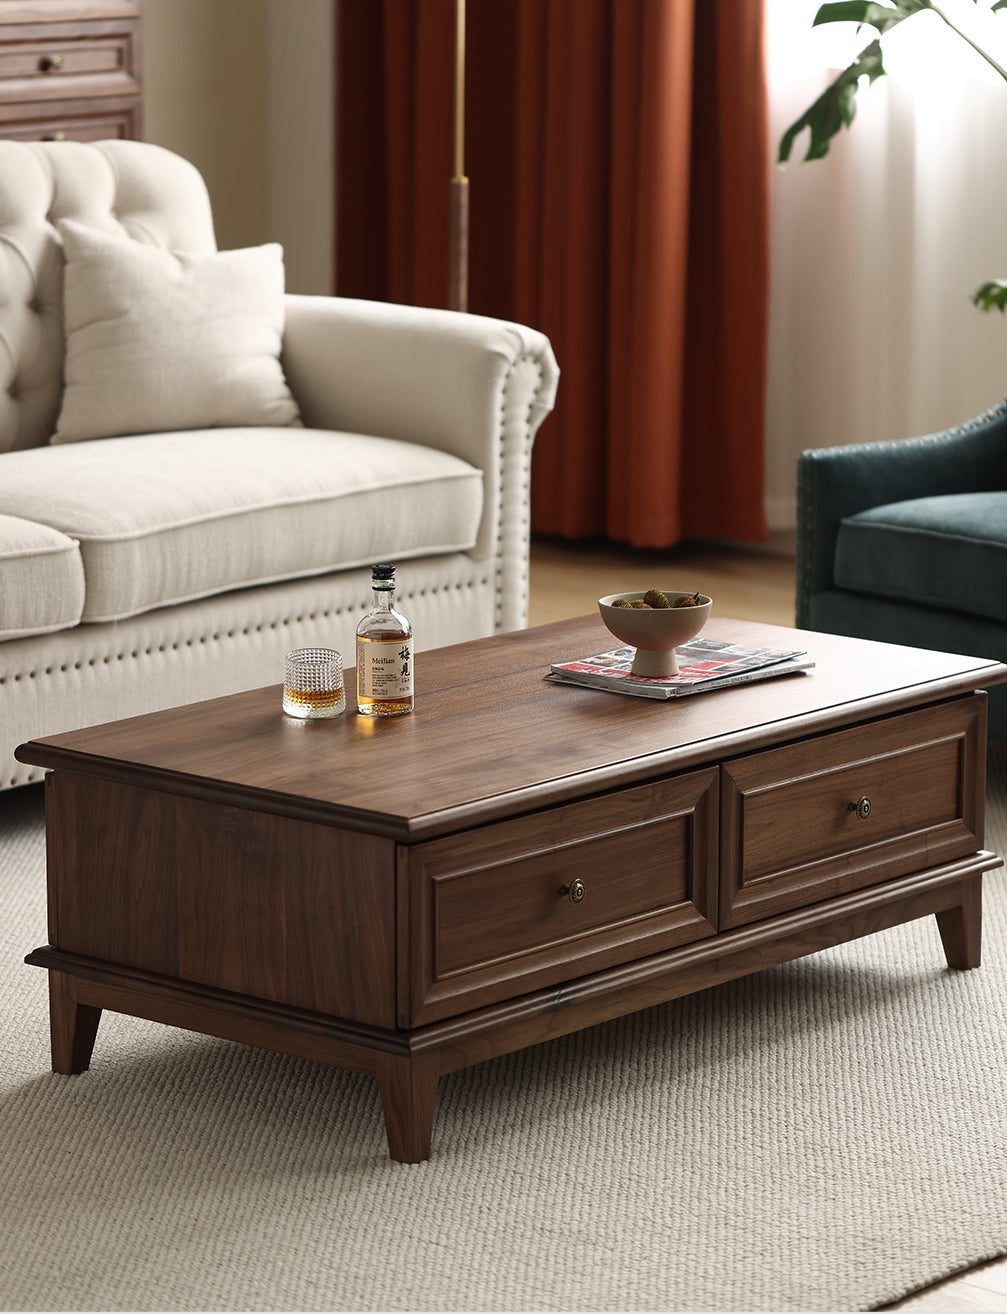 Solid wood American style coffee table, made of FAS level black walnut wood